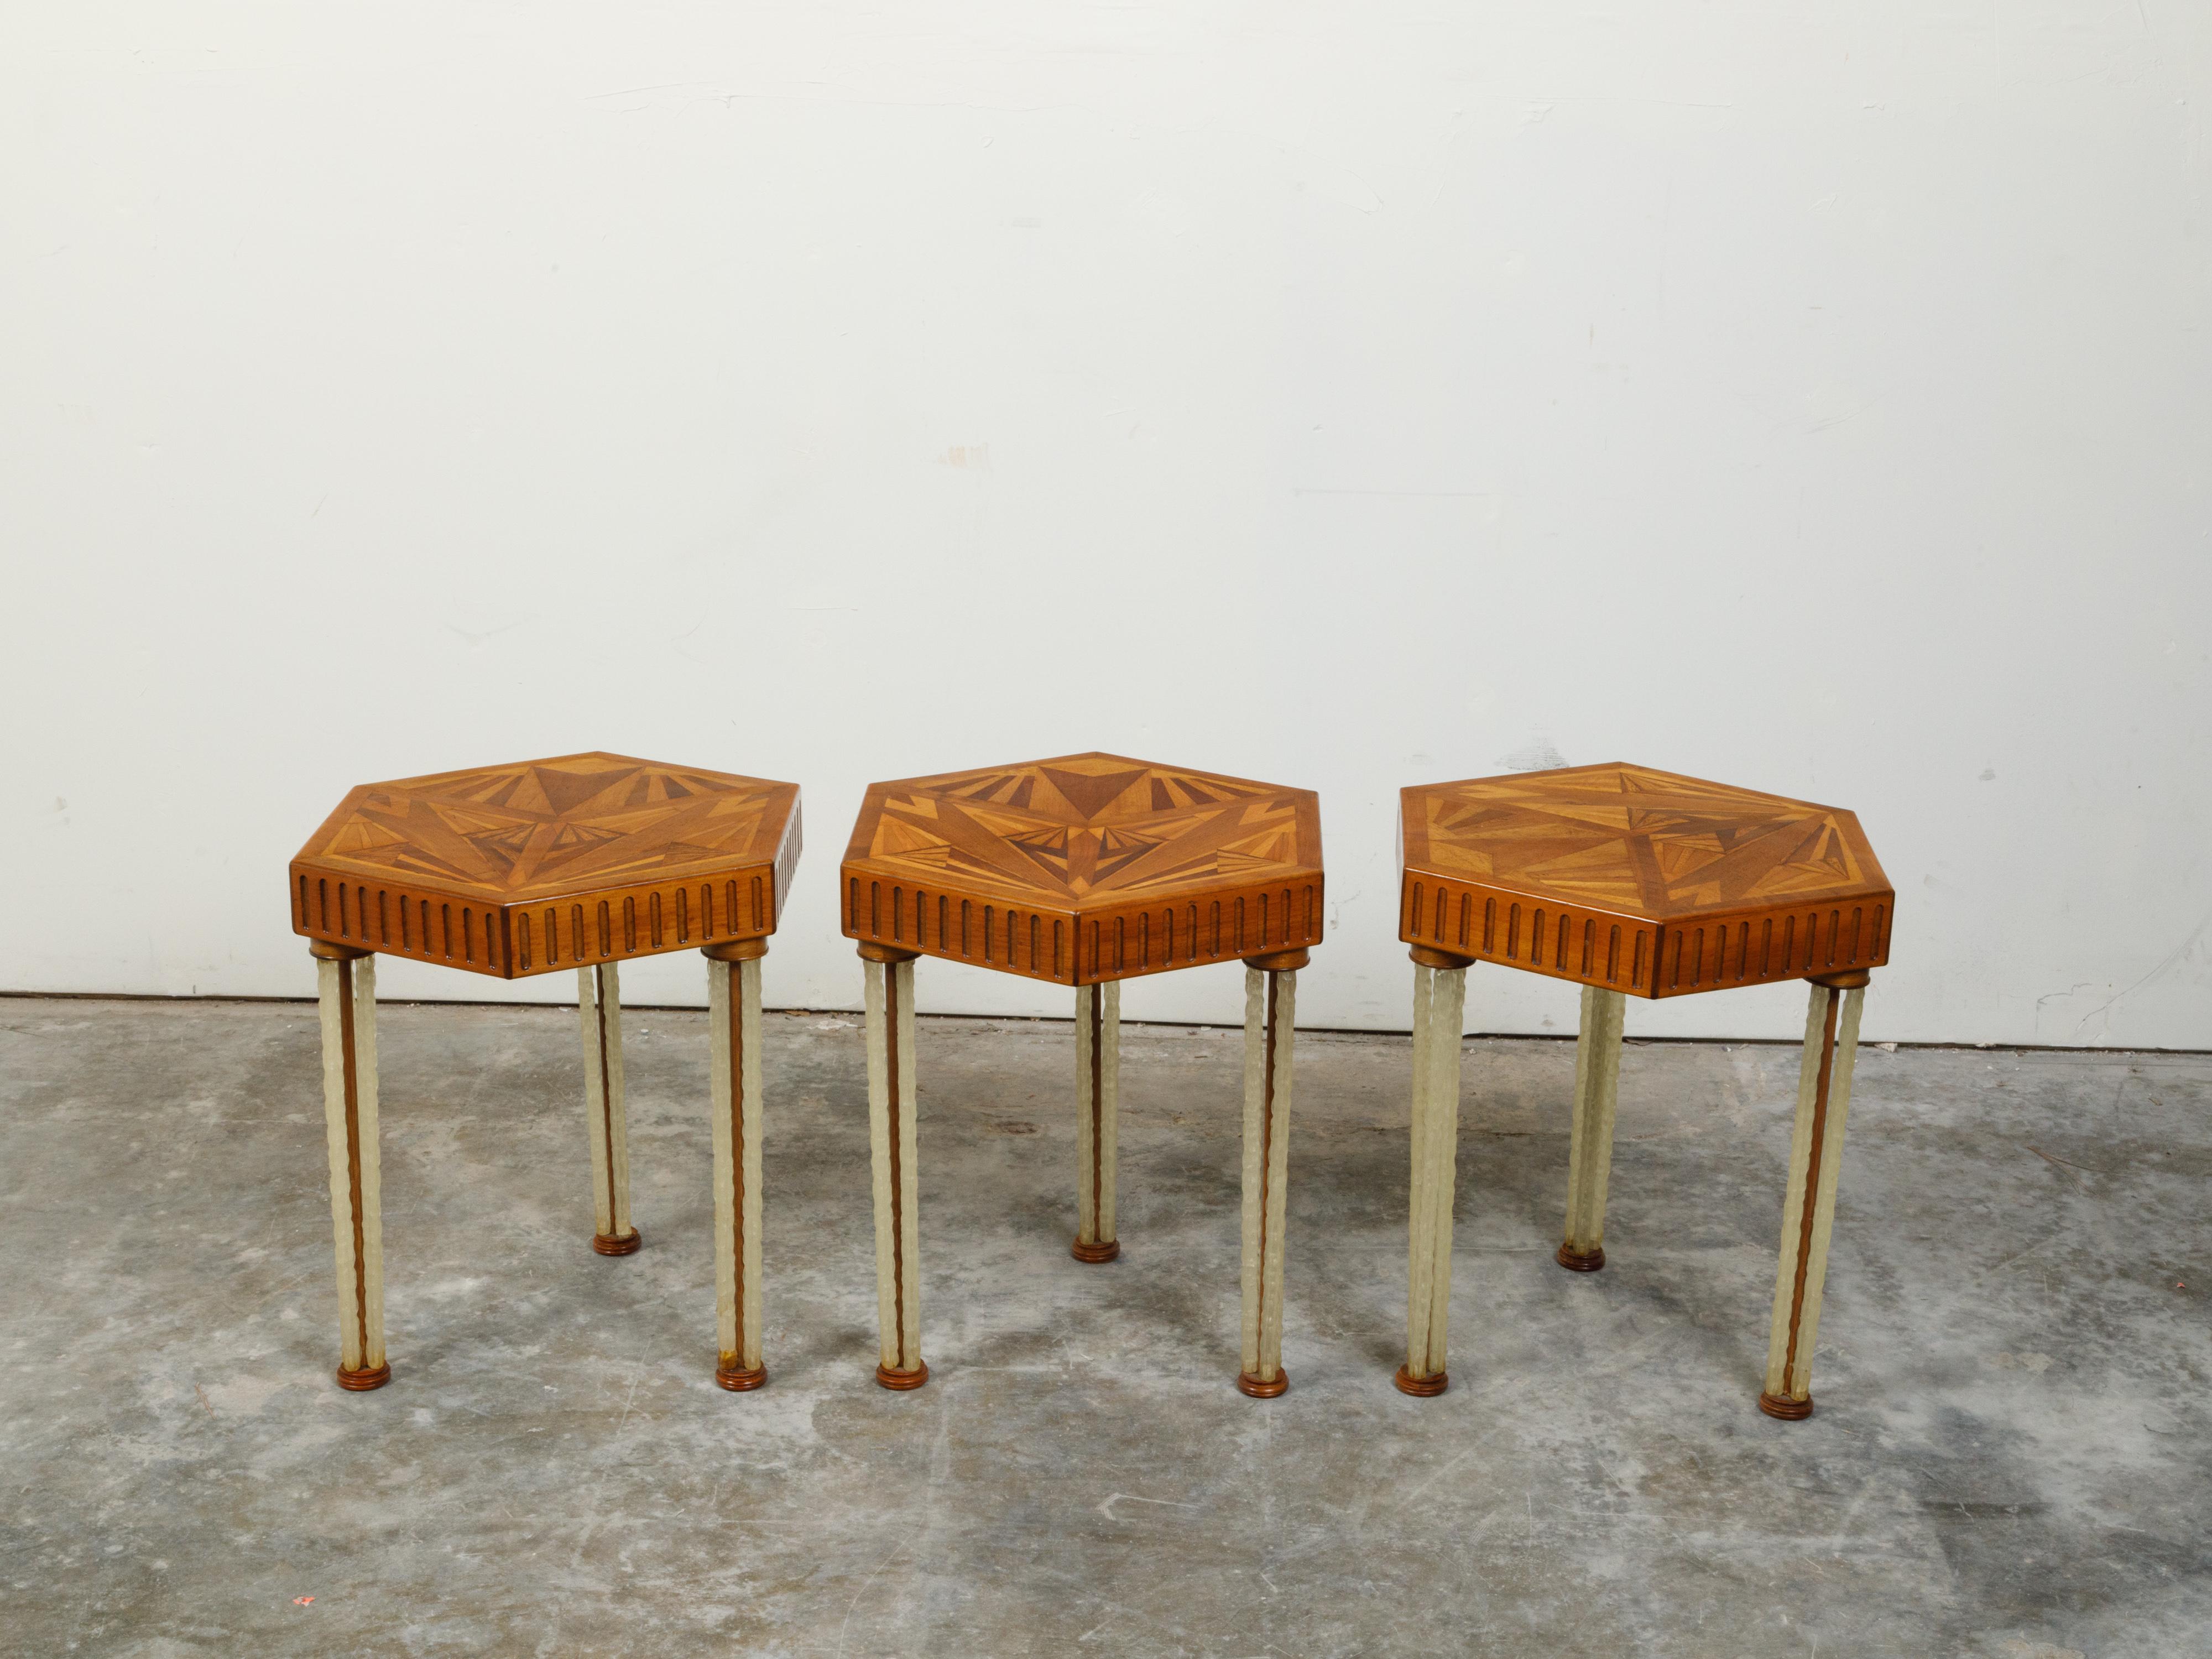 20th Century Art Deco 1930s Side Tables with Hexagonal Marquetry Tops and Lucite Legs For Sale